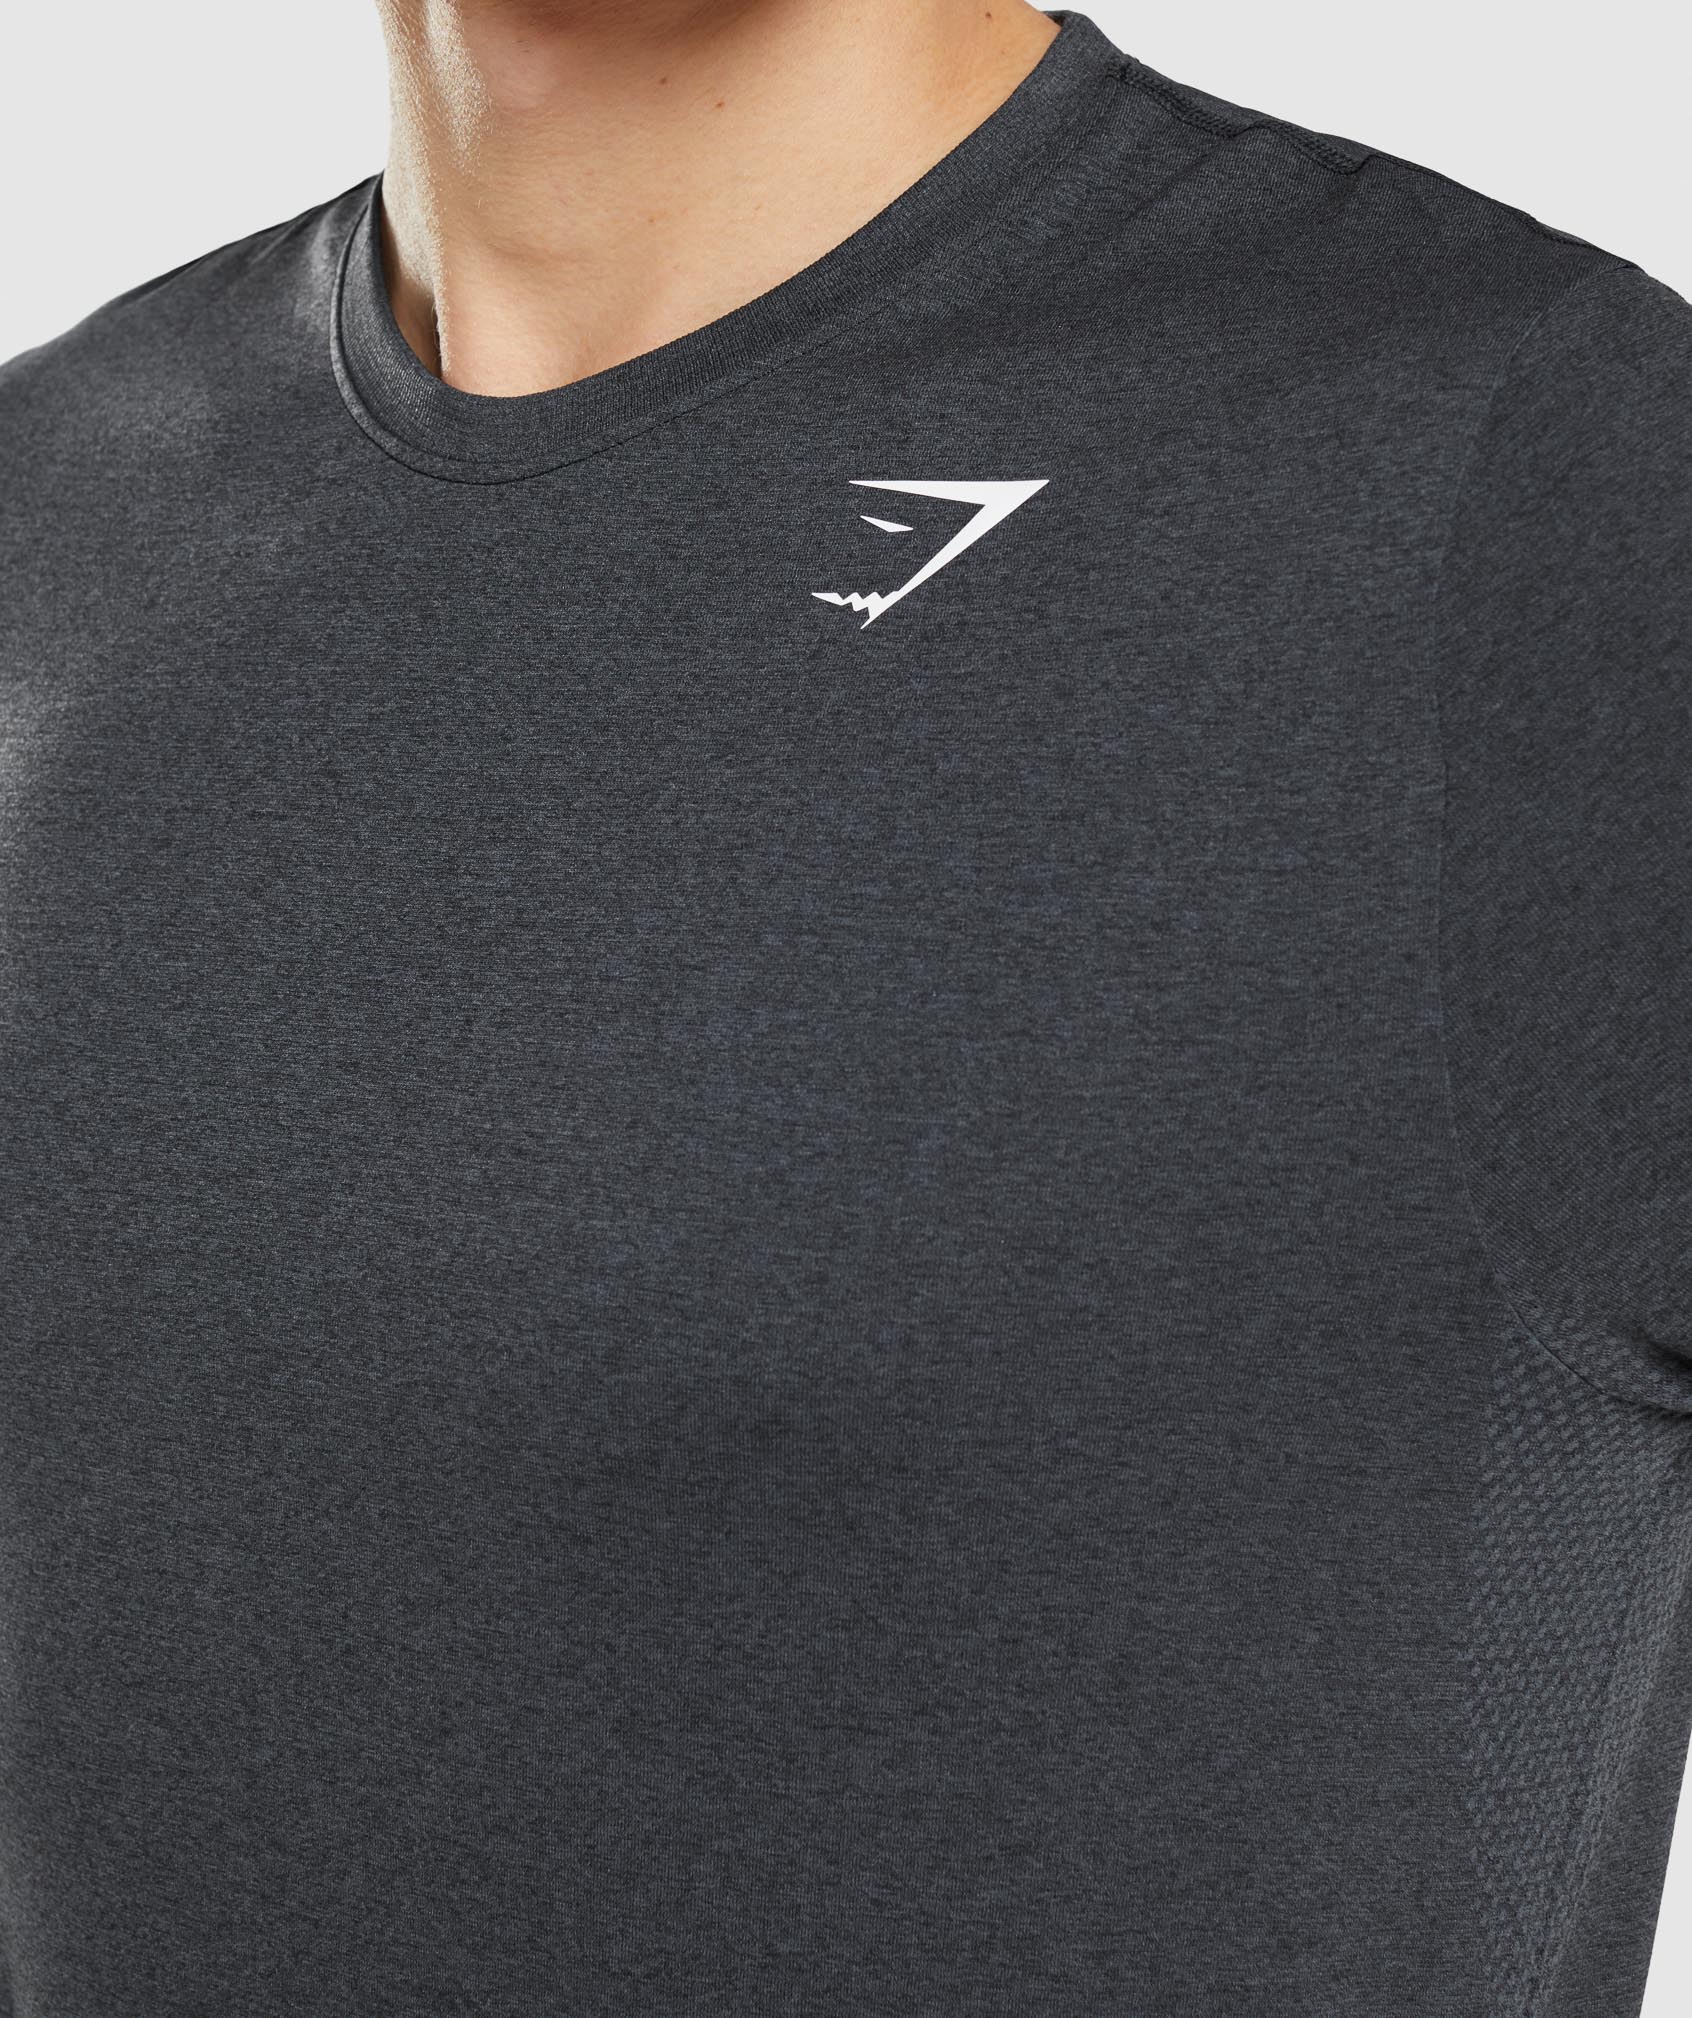 Arrival Seamless T-Shirt in Black Marl - view 5